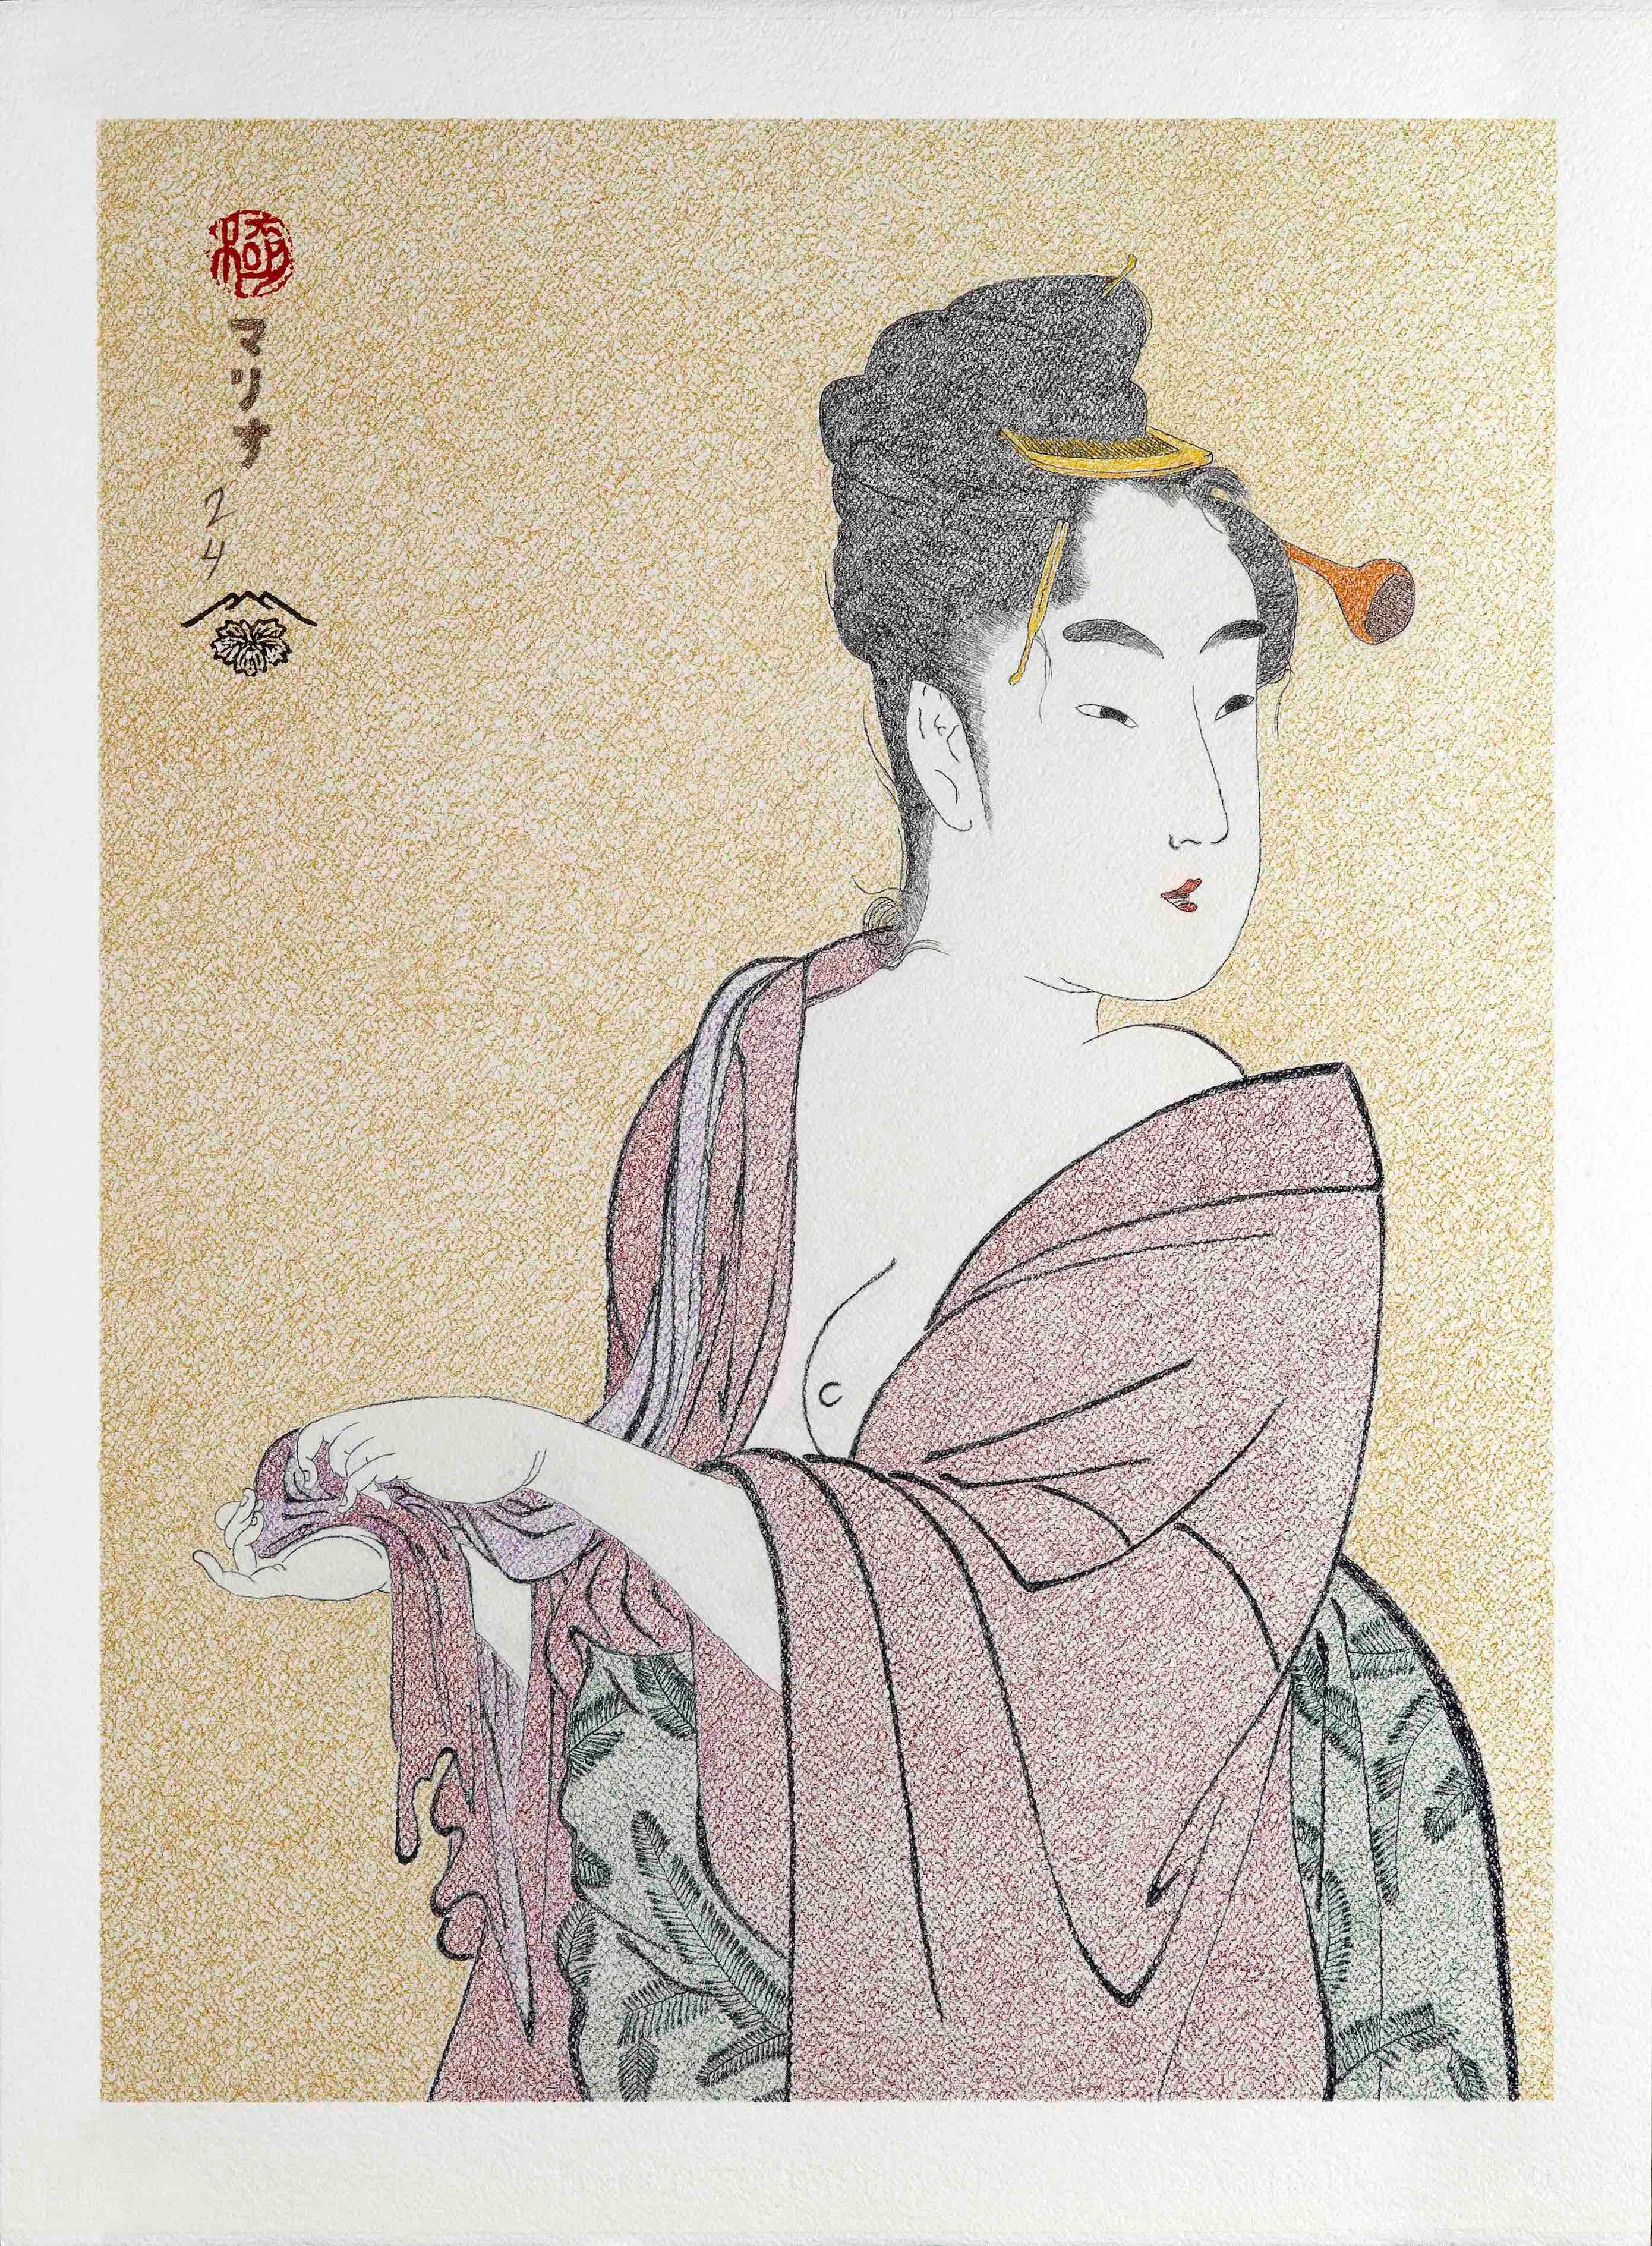 Bijing-ga Series XXII (Nº 22)

Title: THE FLICKLE TYPE
Upper half of the body of a woman in yukata (summer kymono) with part of her chest bare. Depicted just after a bath, she is turning her head and drying her hands with the towel hang on her